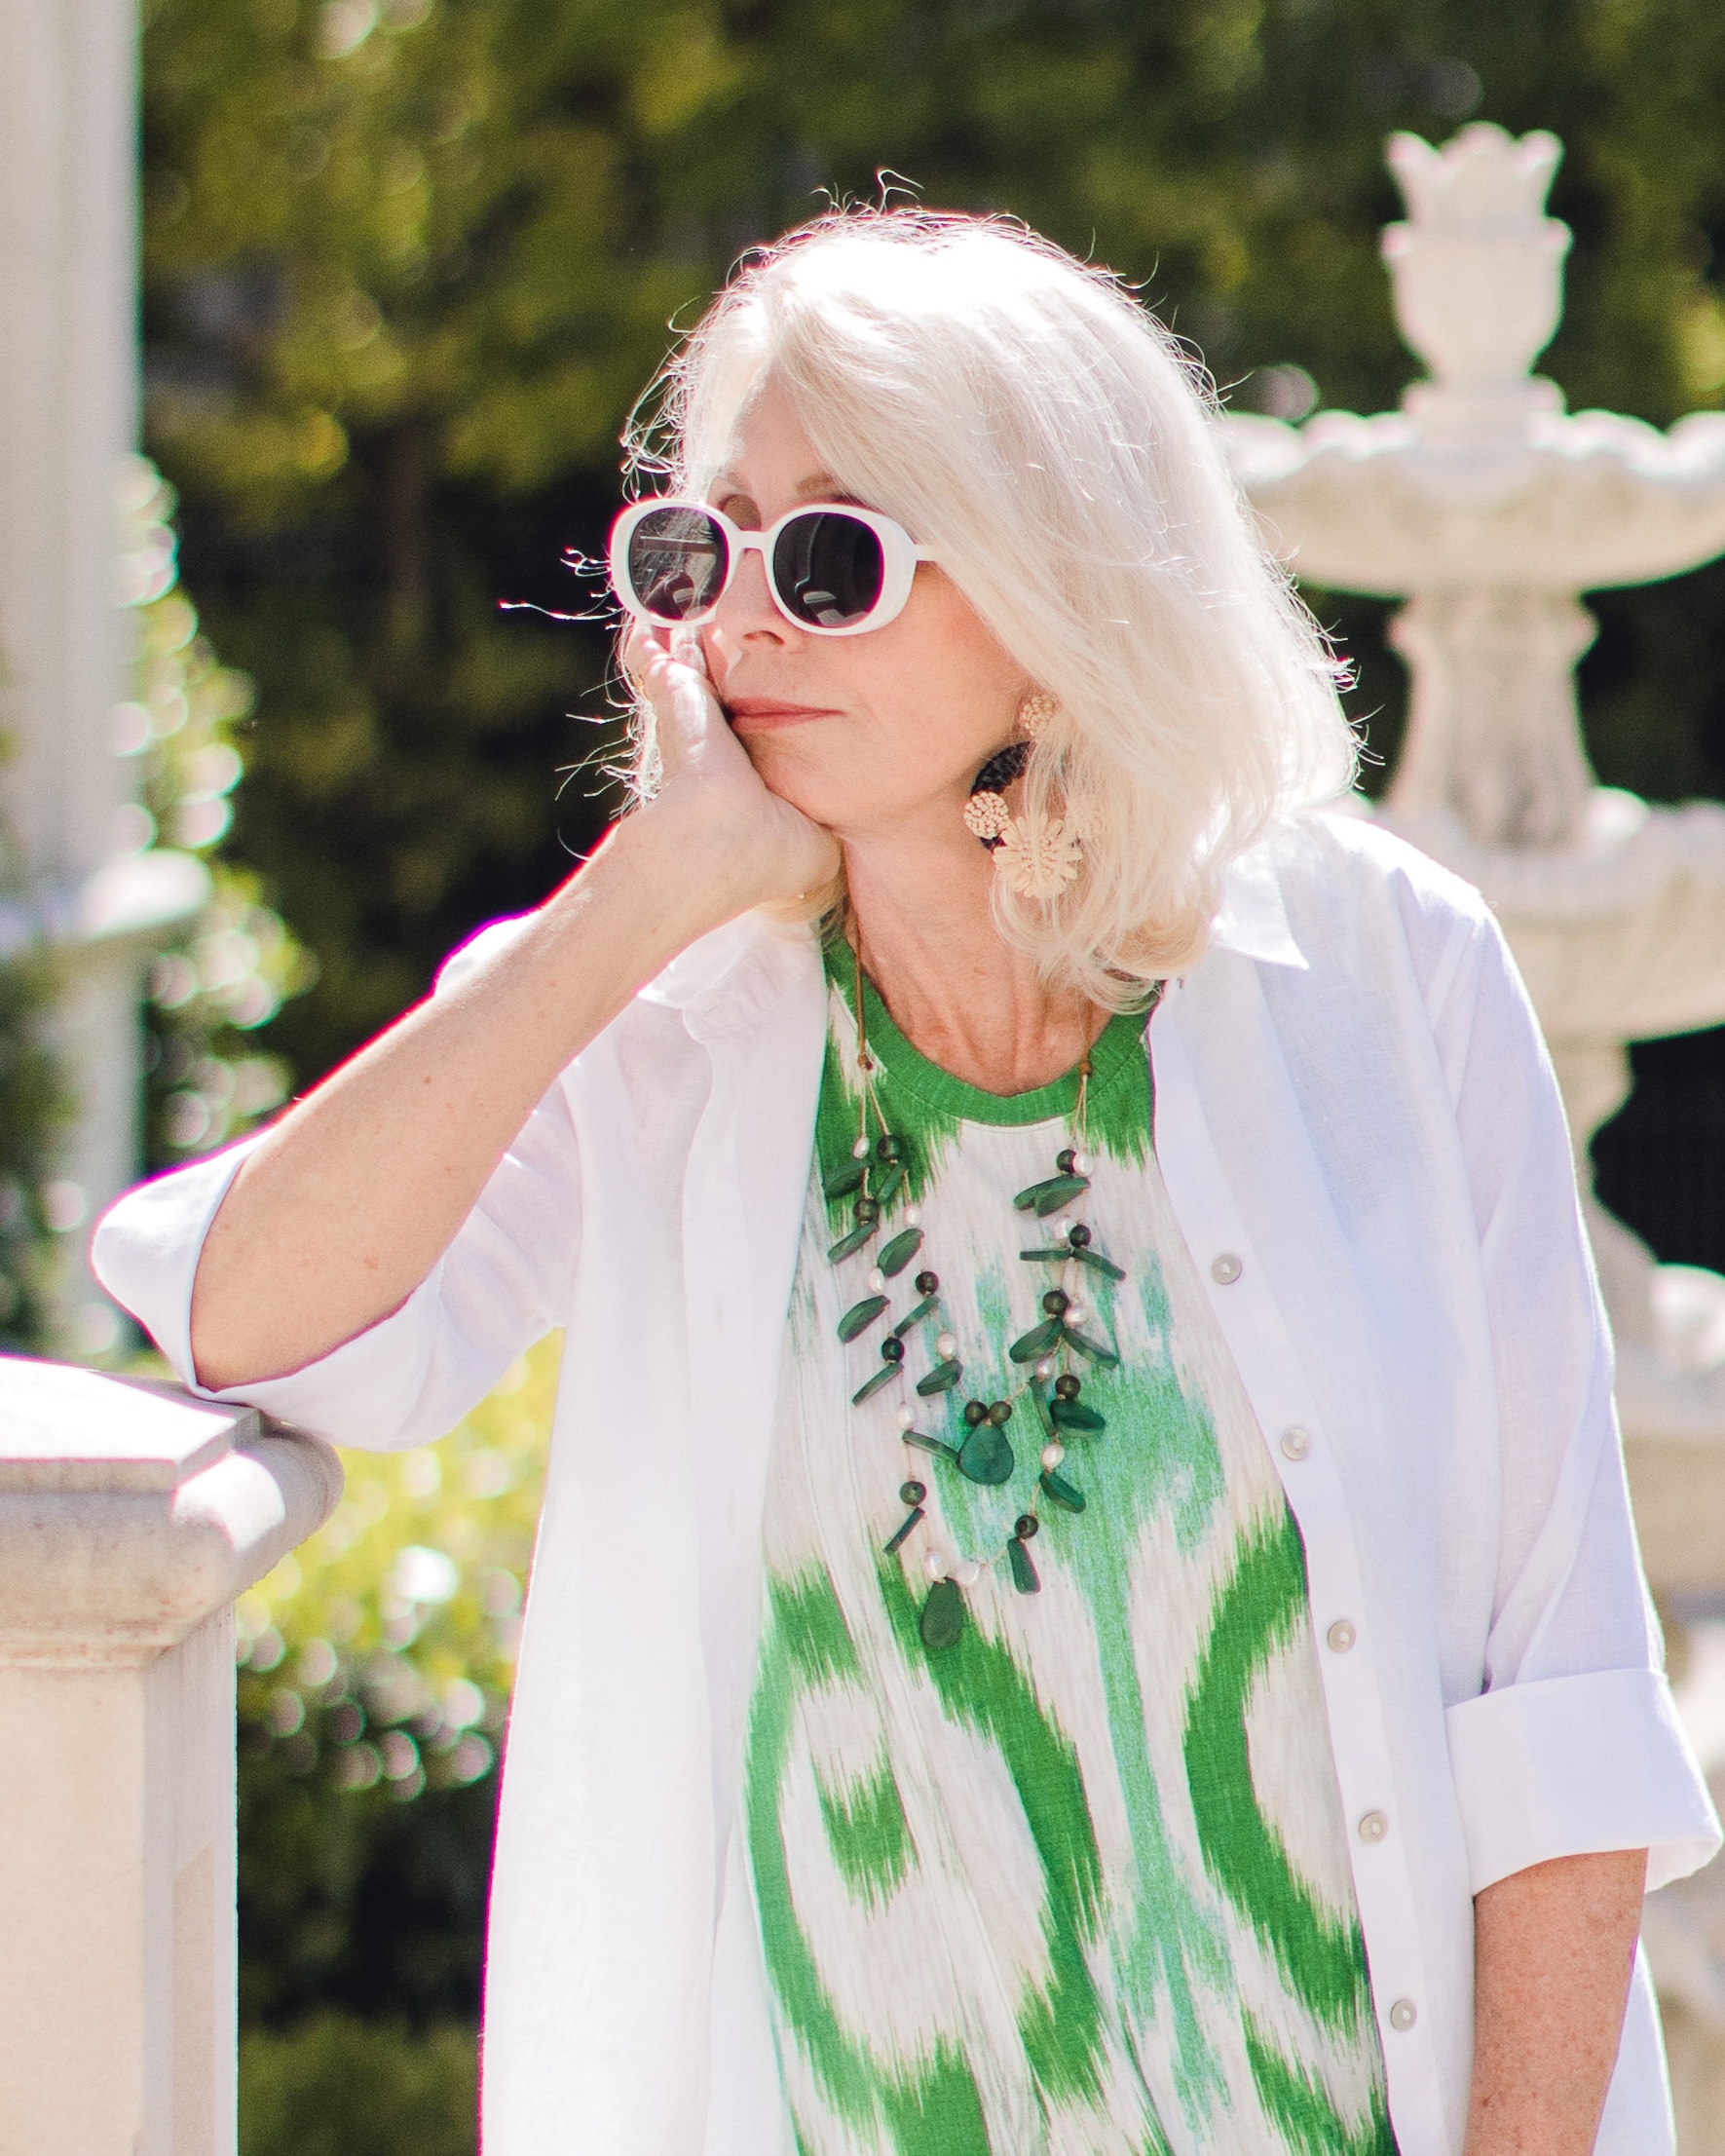 Blonde woman leaning with her hand on her chin wearing a white blouse over a green printed dress and a green necklace